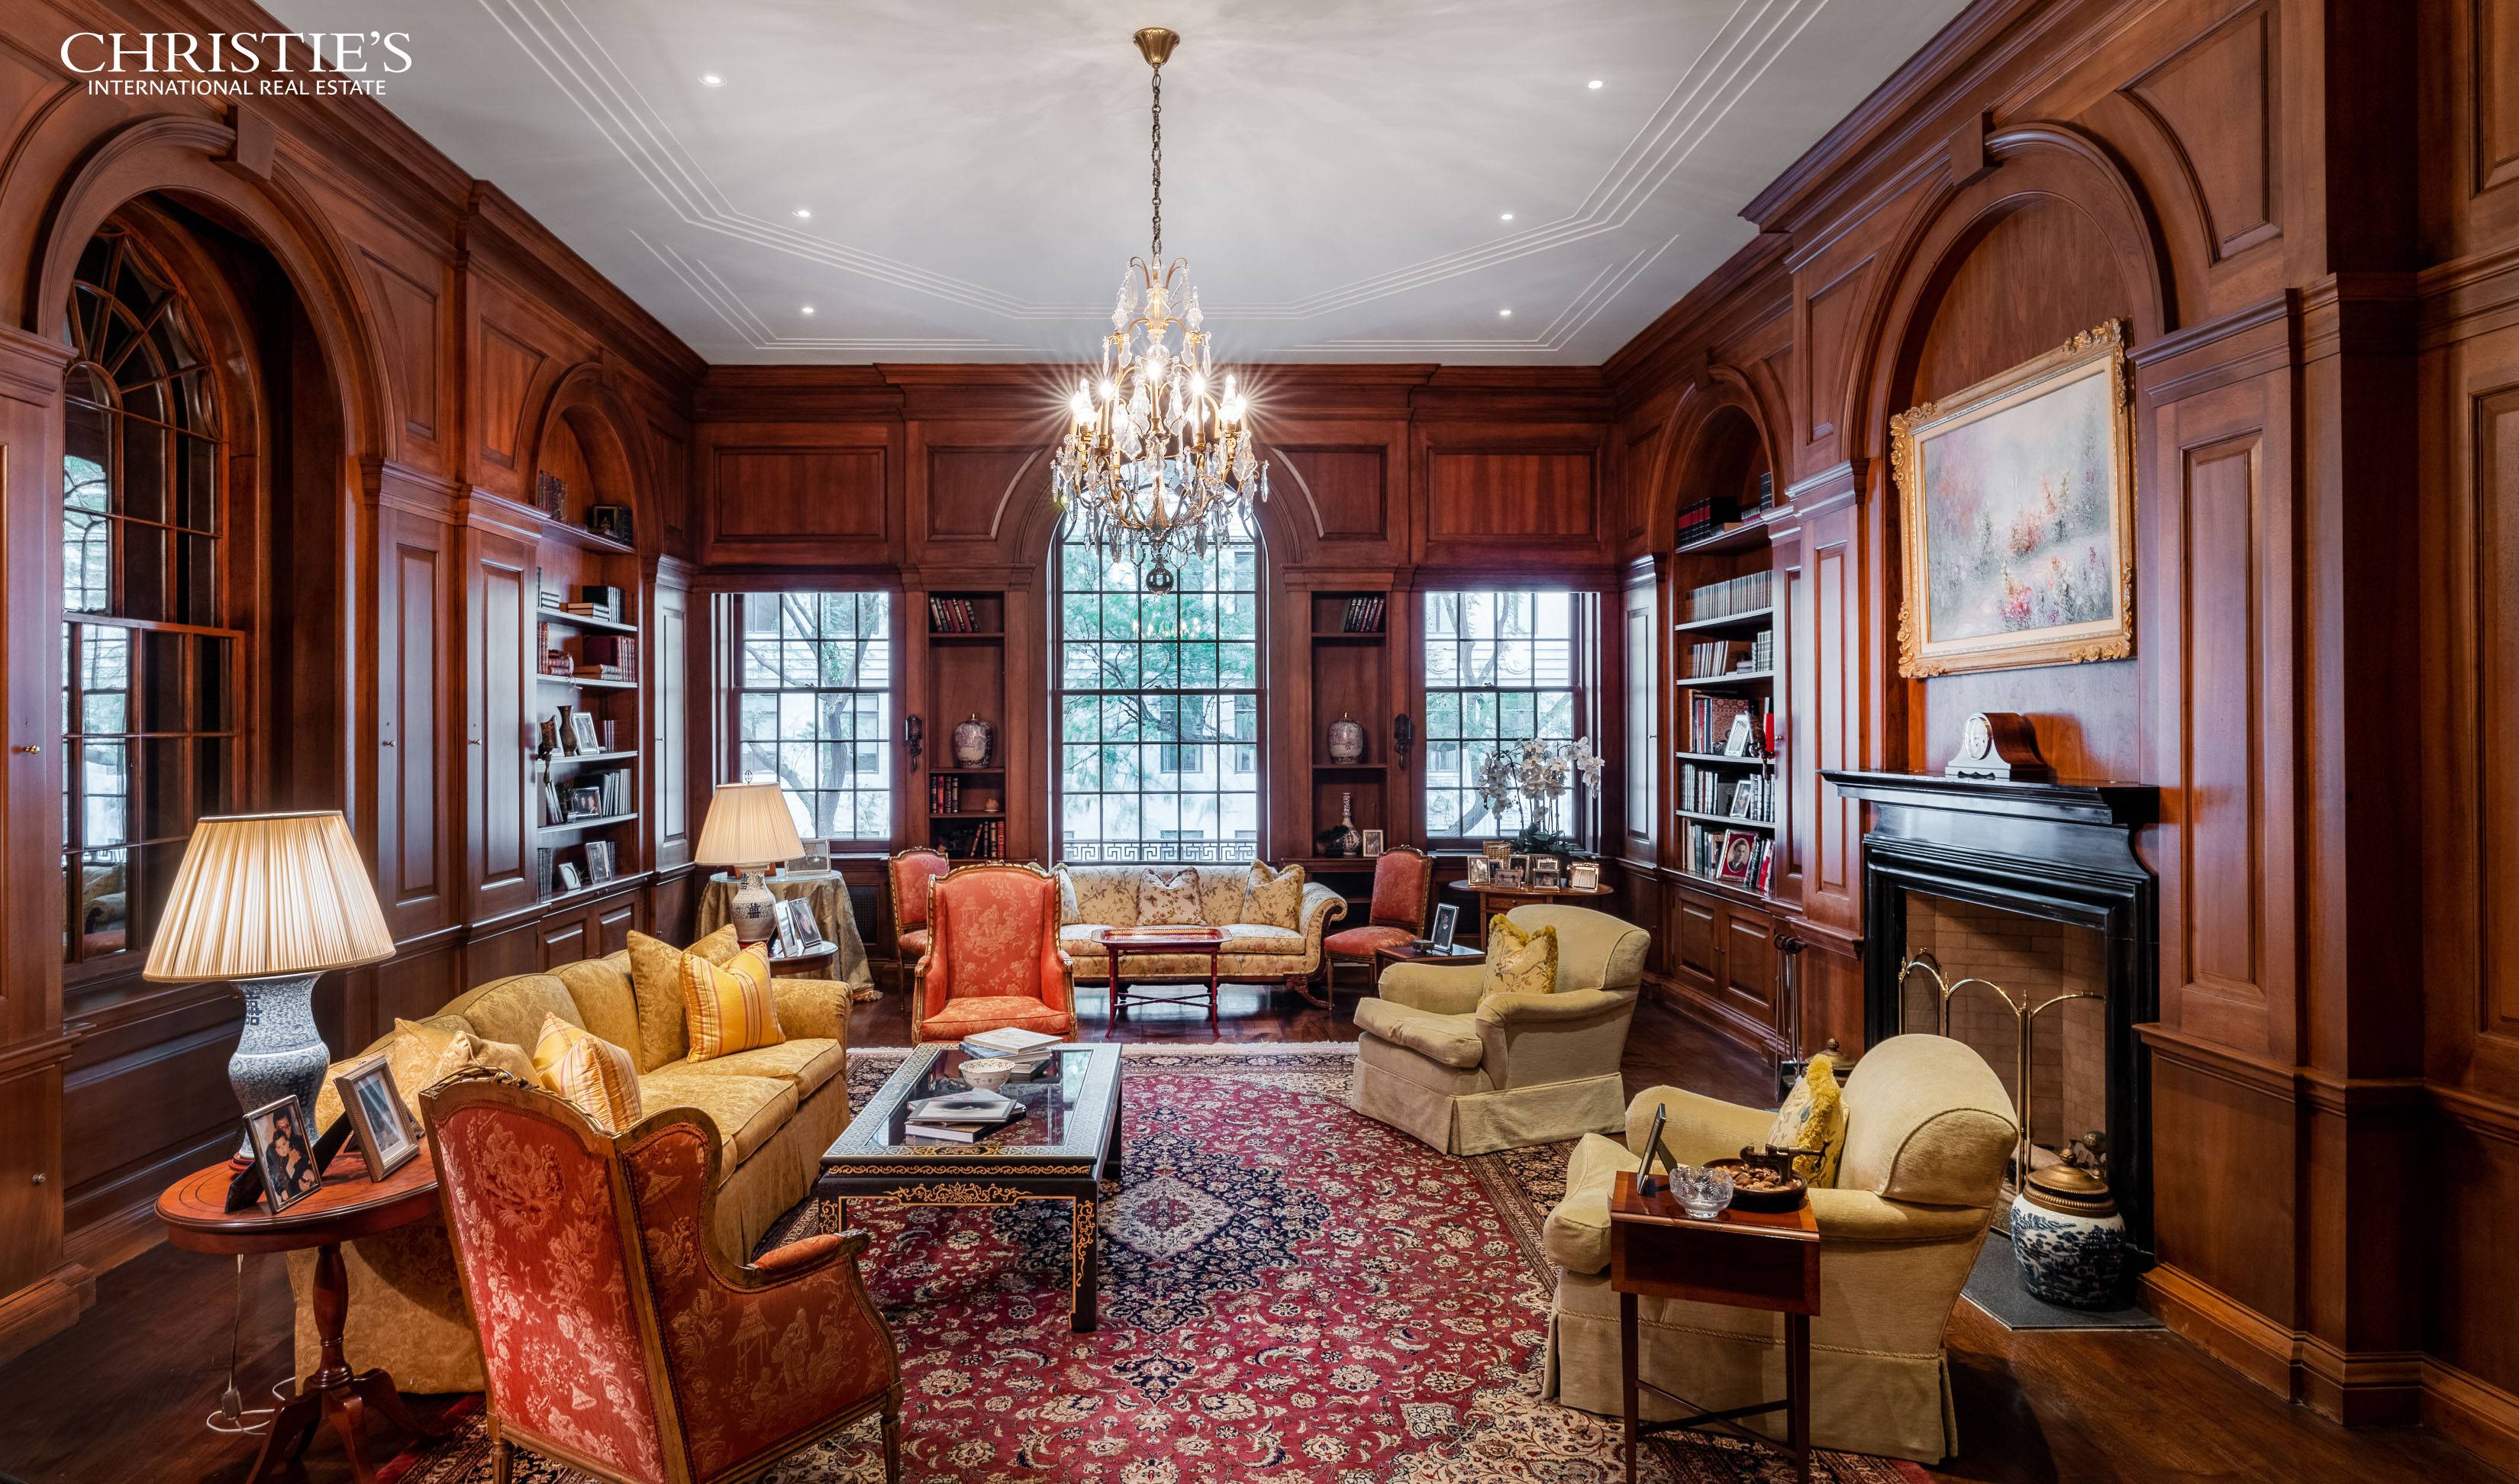 LUXURIOUS LIMESTONE MANSION Breathtaking in scale and stunningly detailed, this palatial 25 ft wide 7 story elevatored mansion is located on one of Manhattan's most distinguished blocks off Park Avenue.